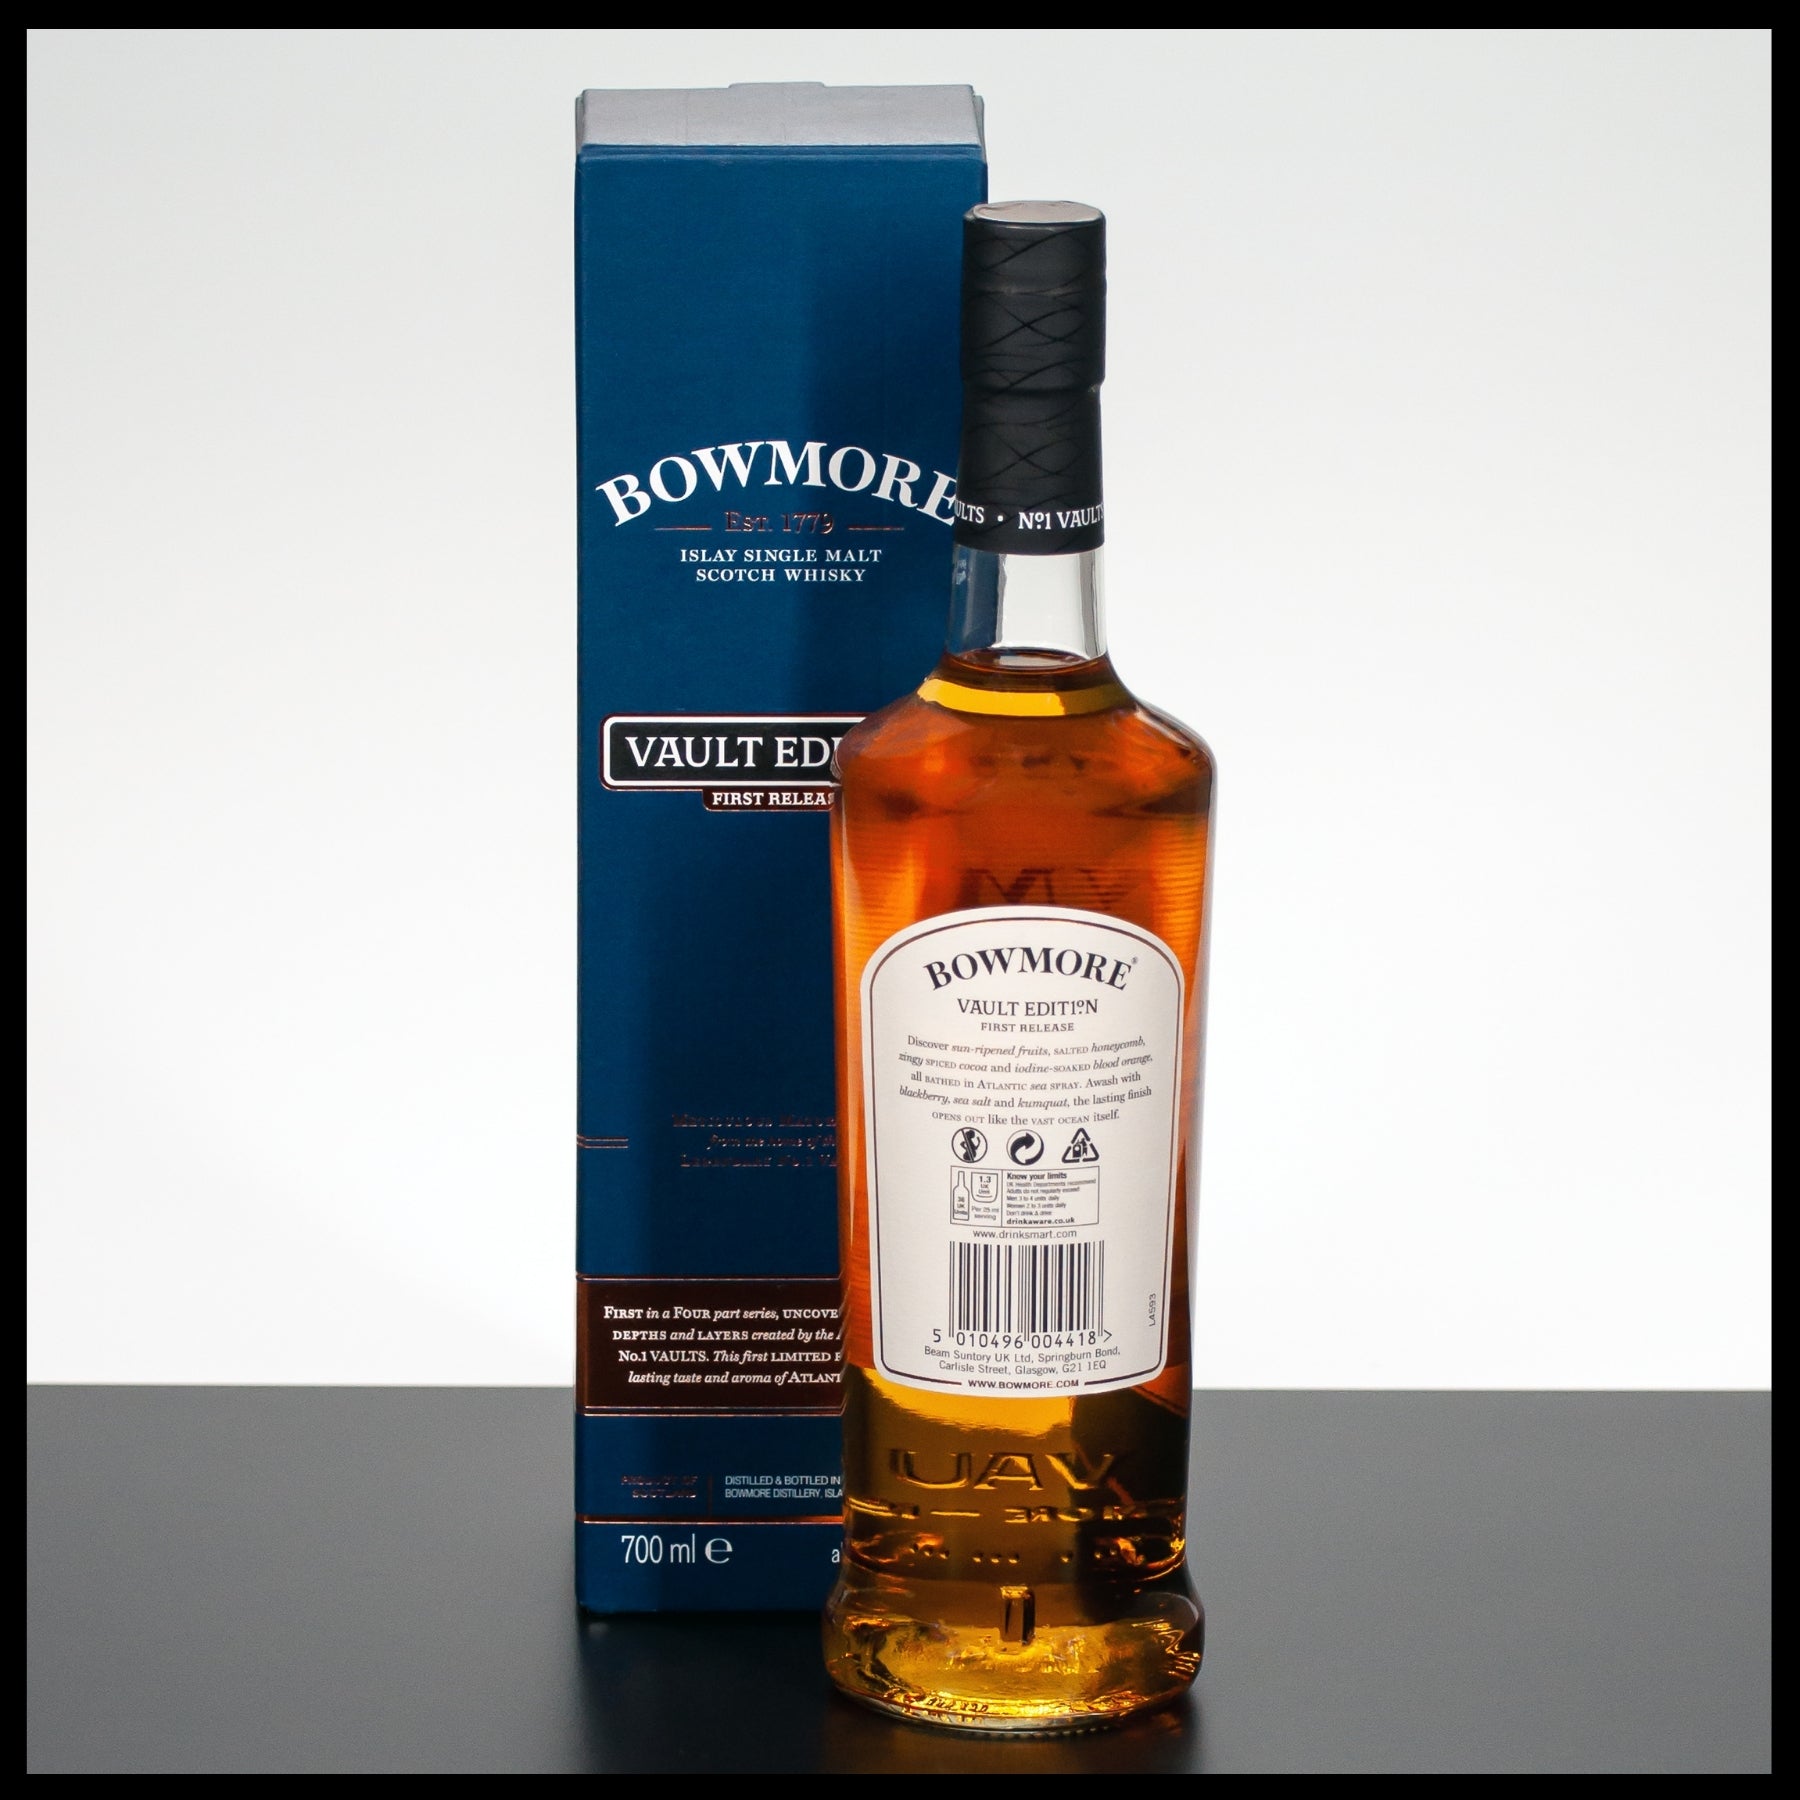 Bowmore Vault Edition First Release 0,7L - 51,5% | Trinklusiv